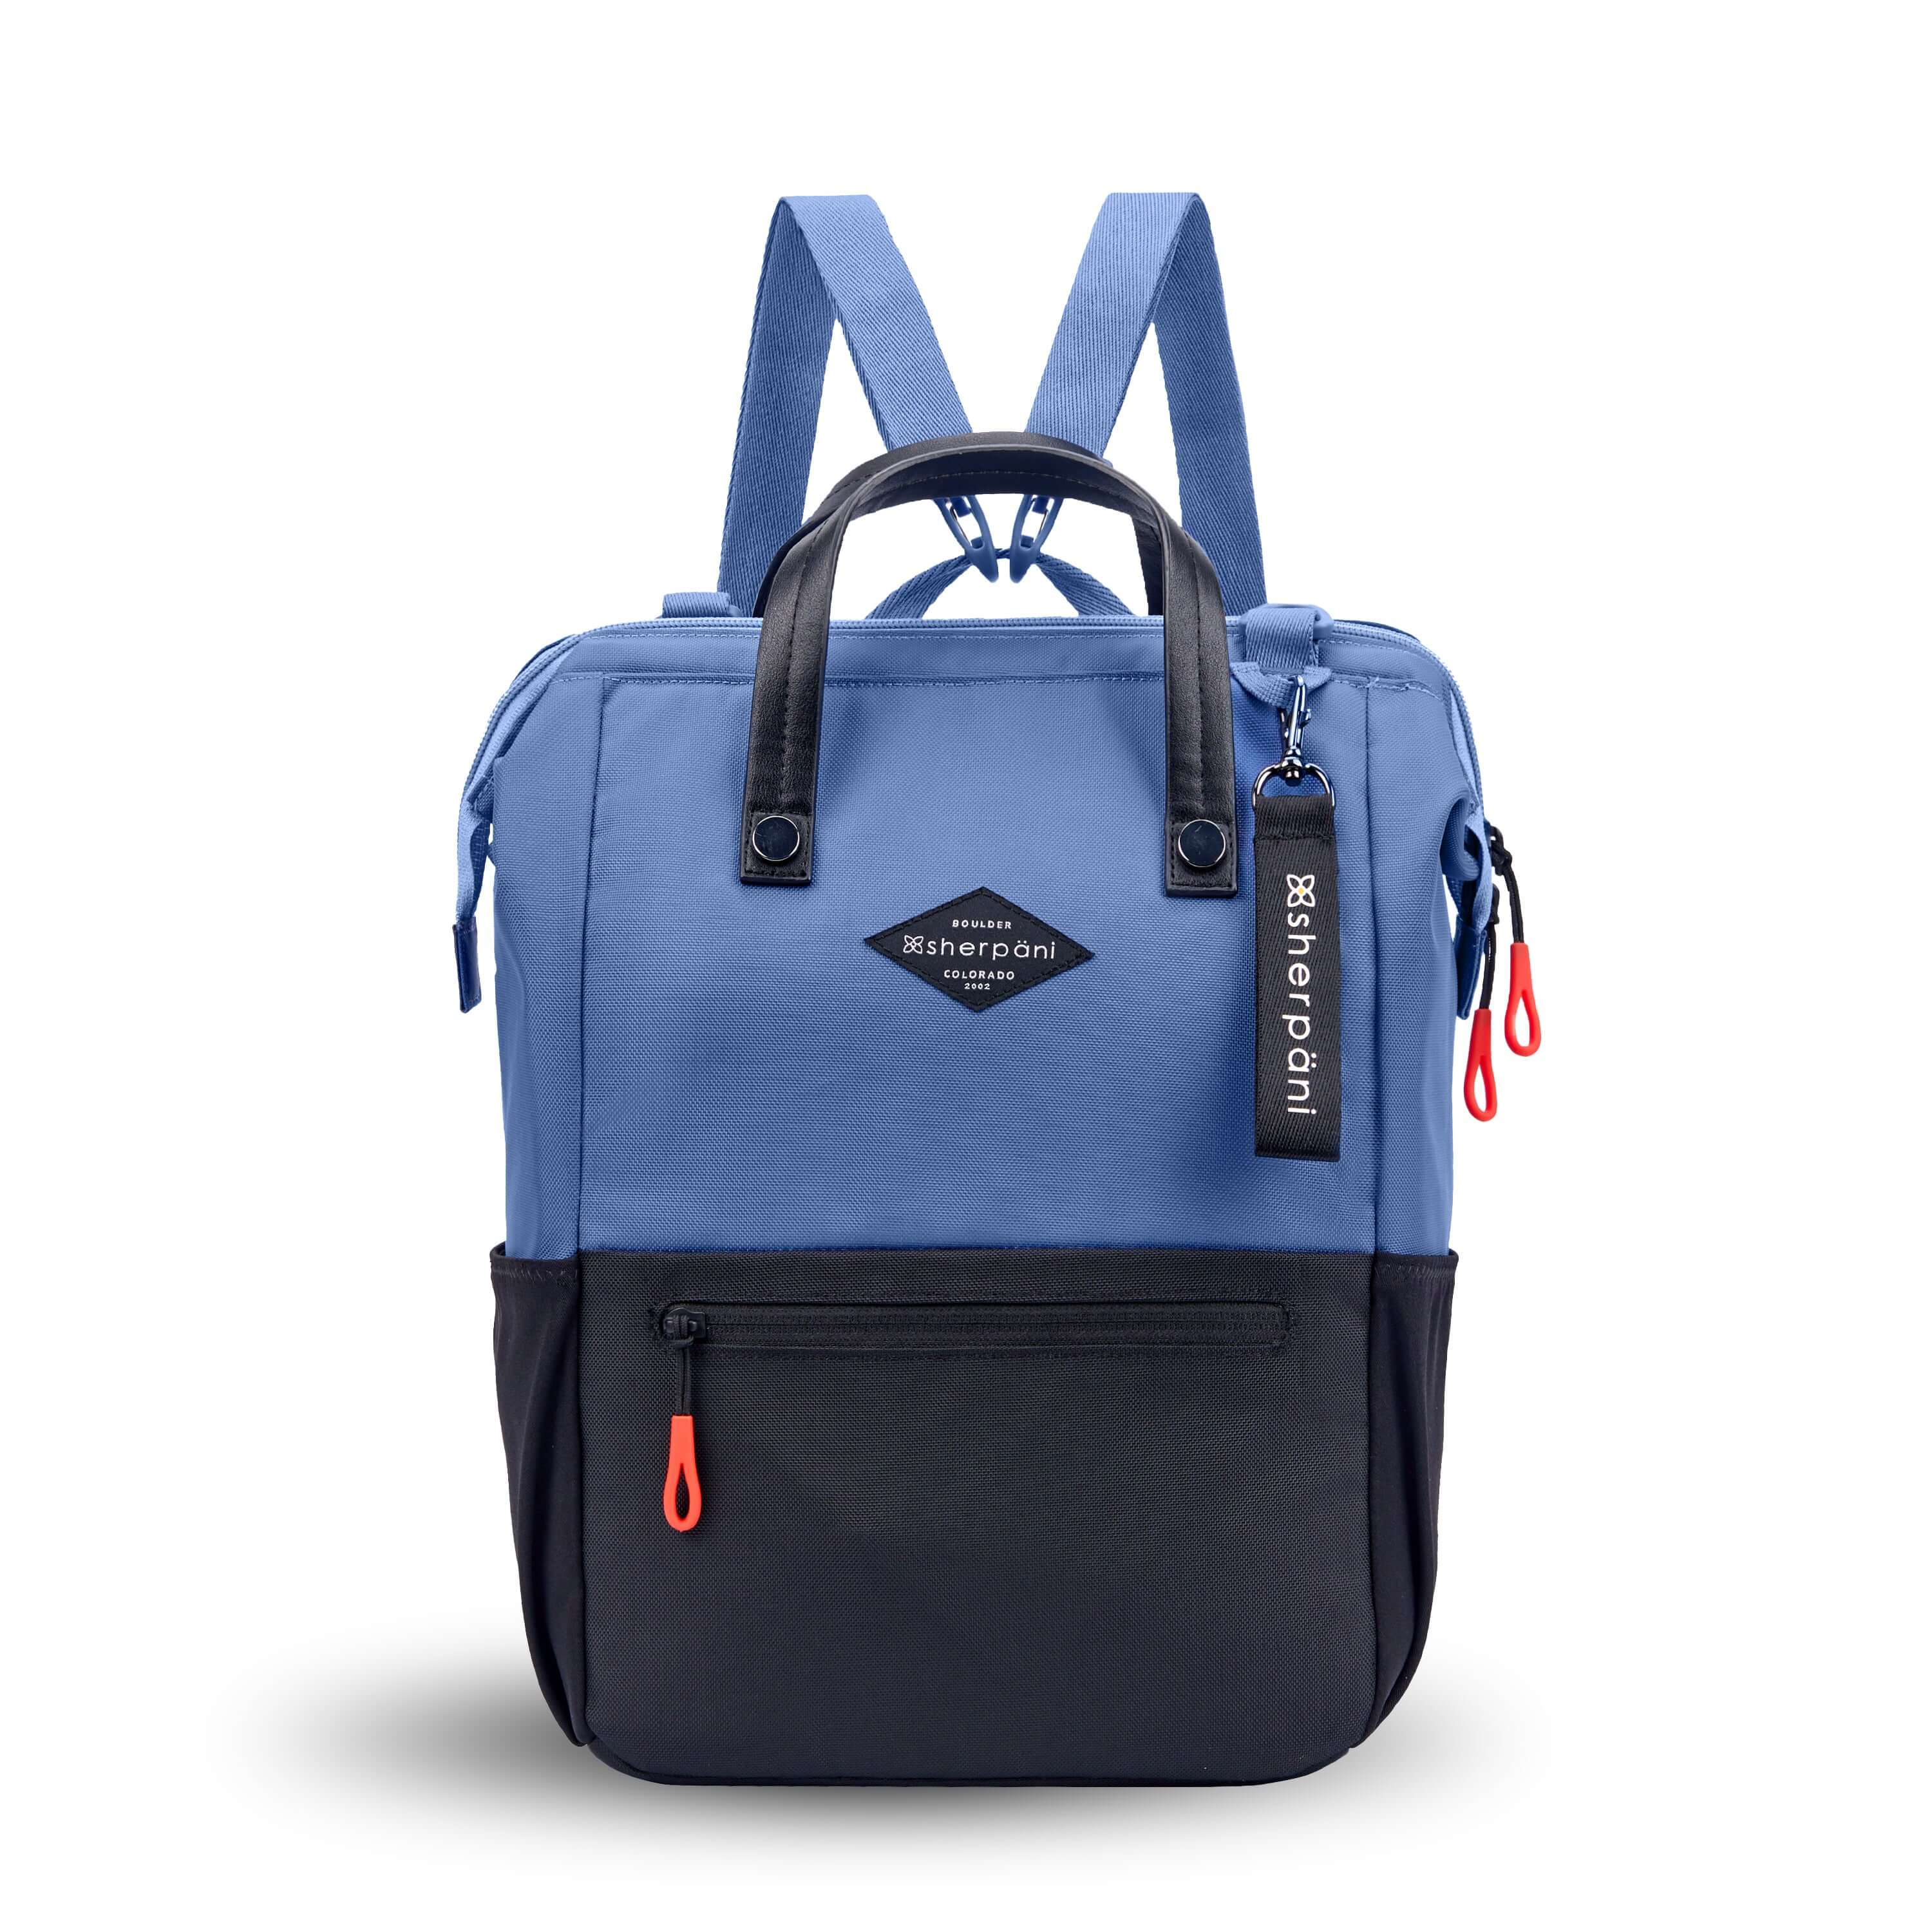 Flat front view of Sherpani three-in-one bag, the Dispatch in Pacific Blue. The bag is two-toned: the top is ocean blue and the bottom is black. There is an external zipper pocket on the front panel. Easy-pull zippers are accented in red. A branded Sherpani keychain is clipped to the upper right corner. Elastic water bottle holders sit on either side of the bag. It has short tote handles and adjustable/detachable straps that can function for a backpack or crossbody.